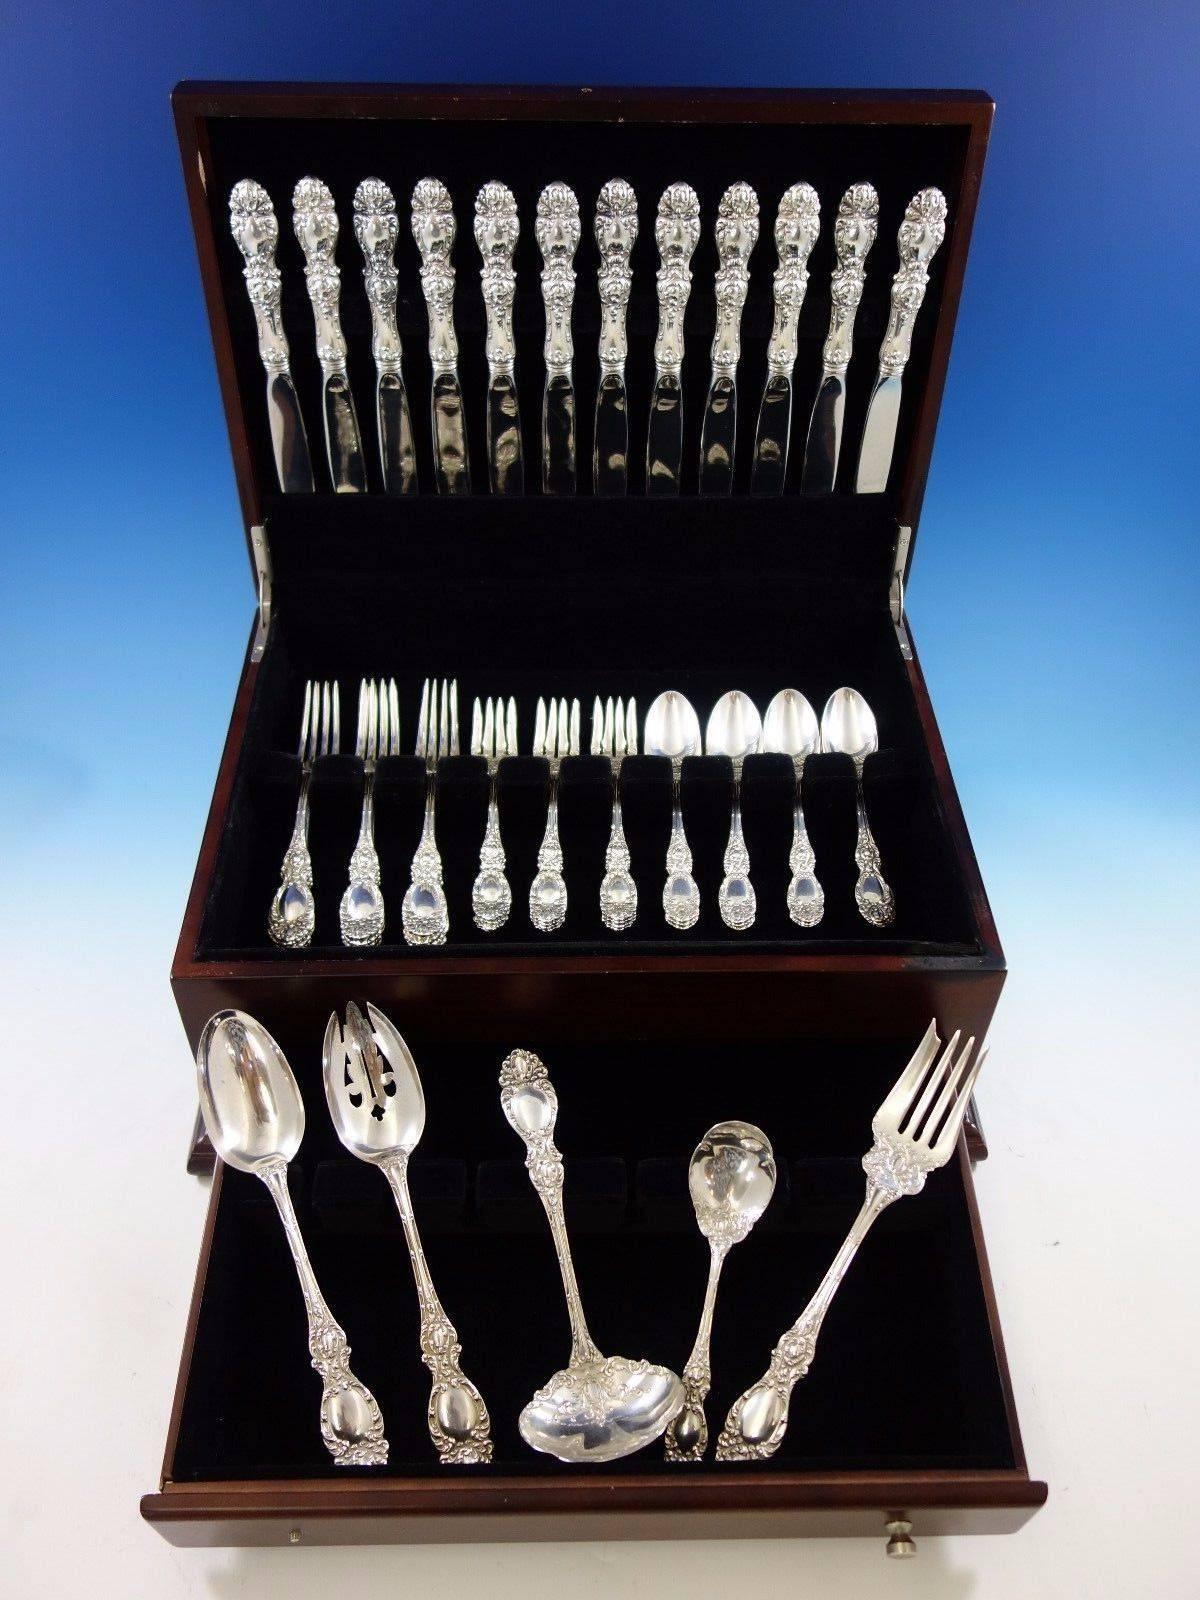 Lucerne by Wallace sterling silver flatware set - 53 pieces. This set includes: 

12 knives, 9